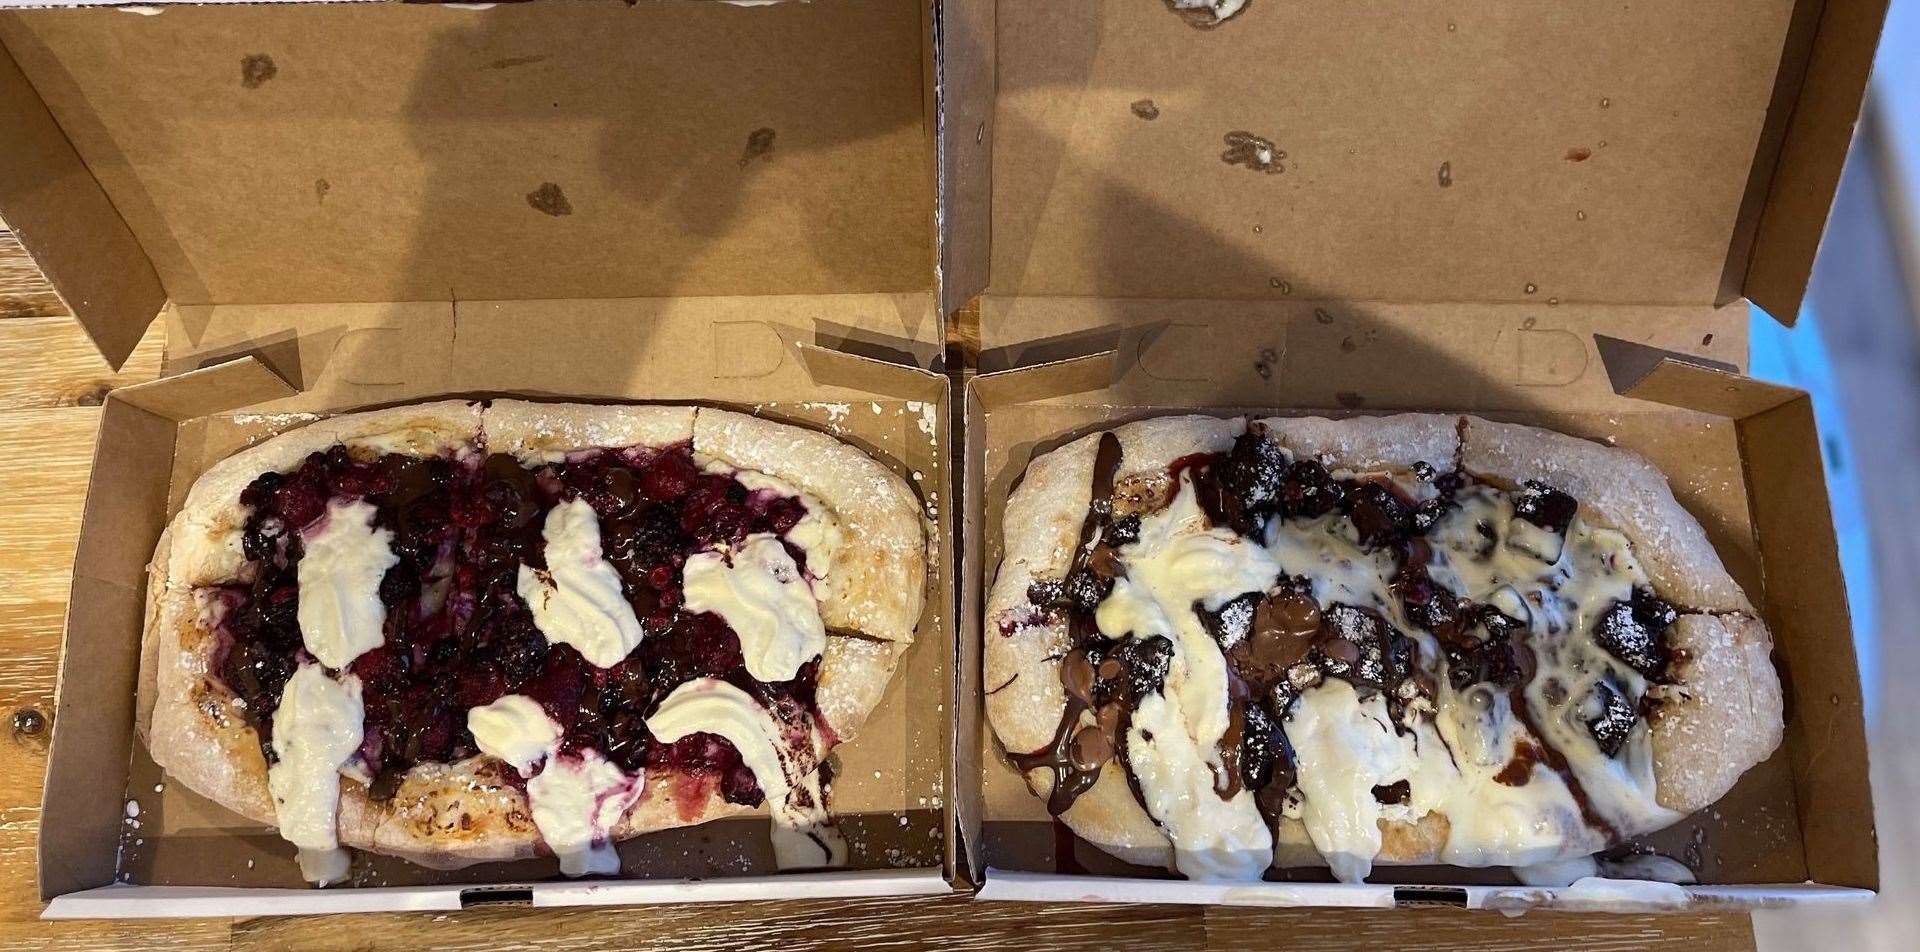 Two dessert pizzas from On Pizza, called summer nights and chocolate lovers